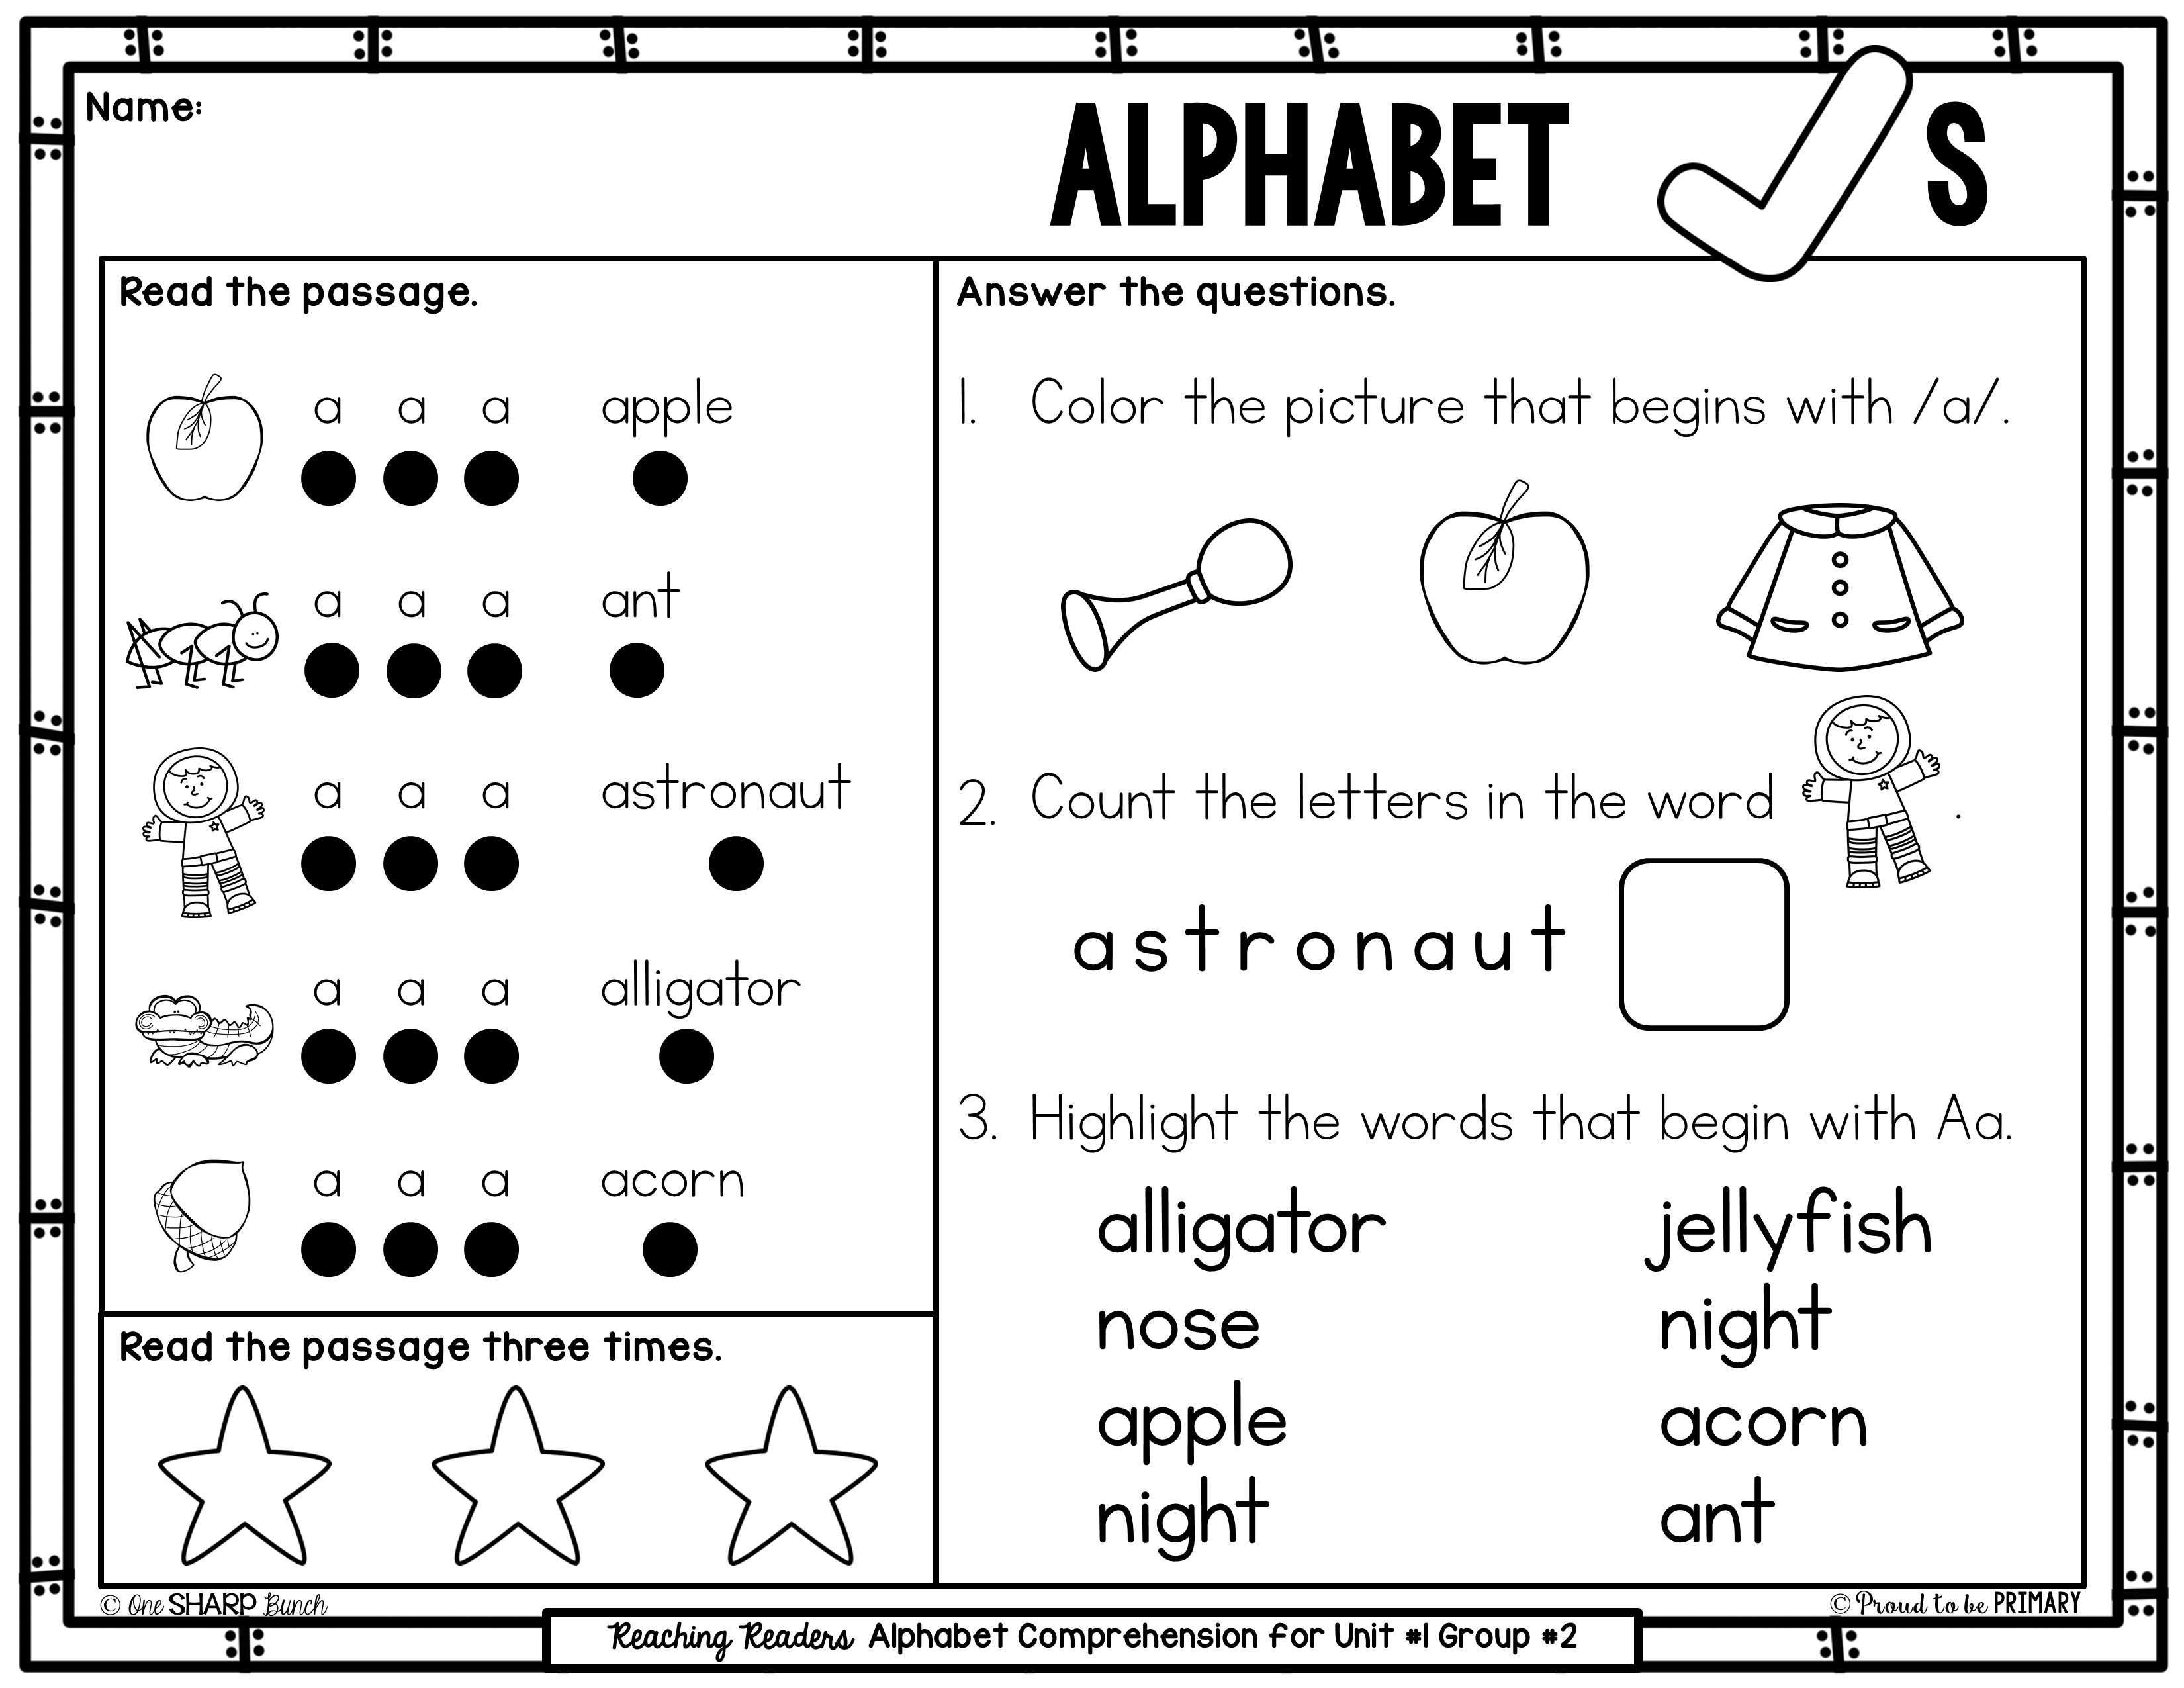 Guided Reading Comprehension Alphabet Checks - Proud to be Primary